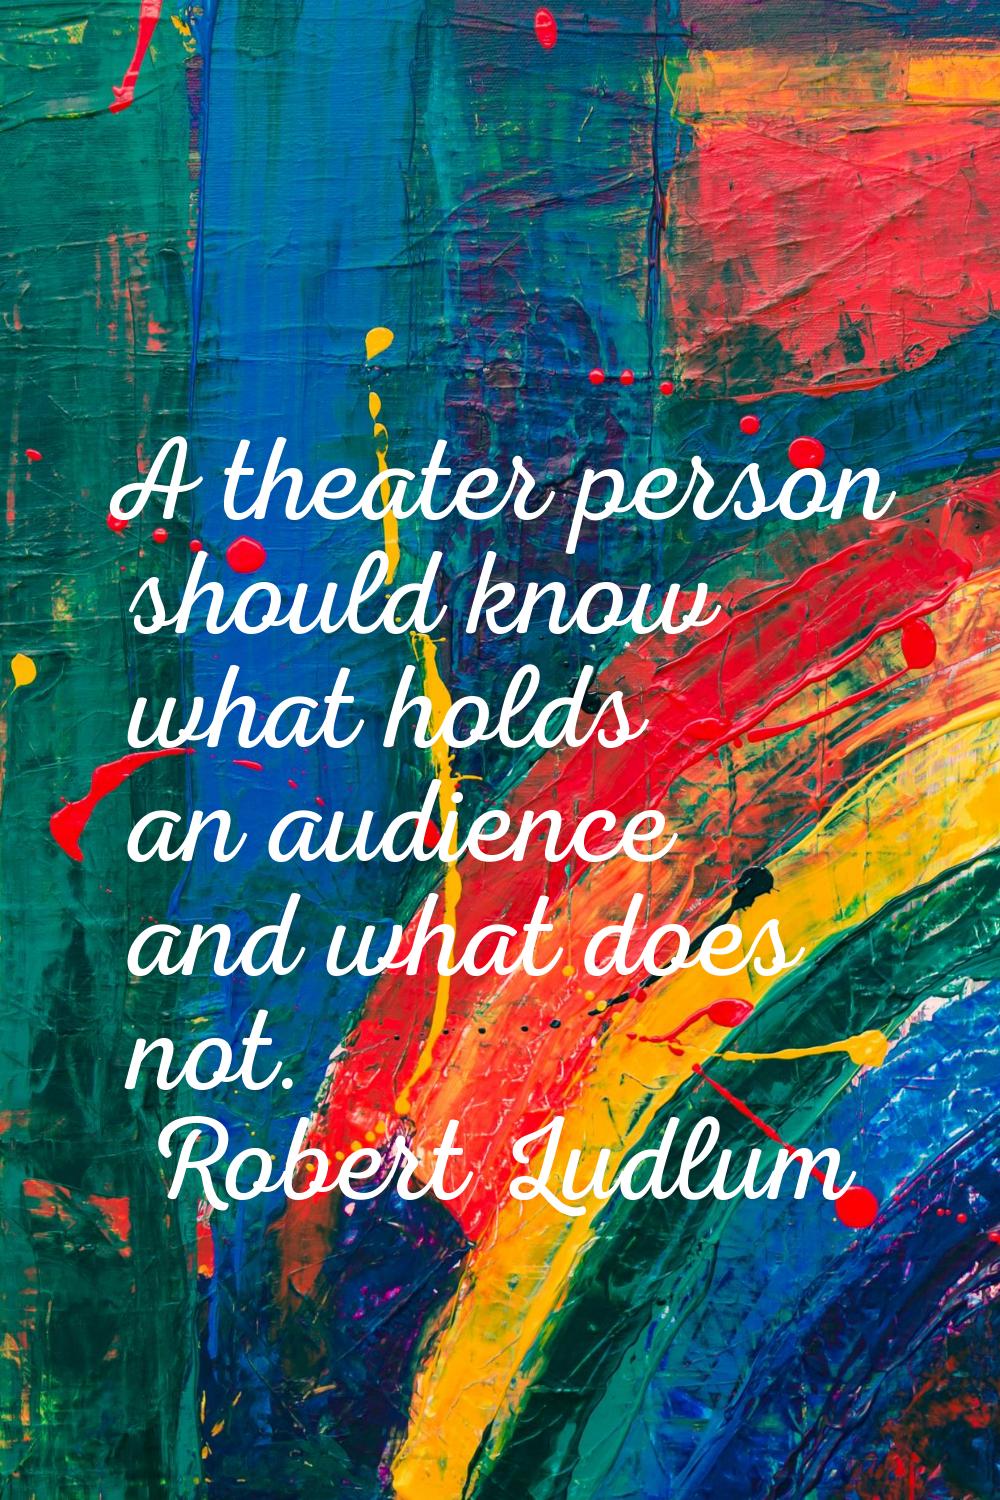 A theater person should know what holds an audience and what does not.